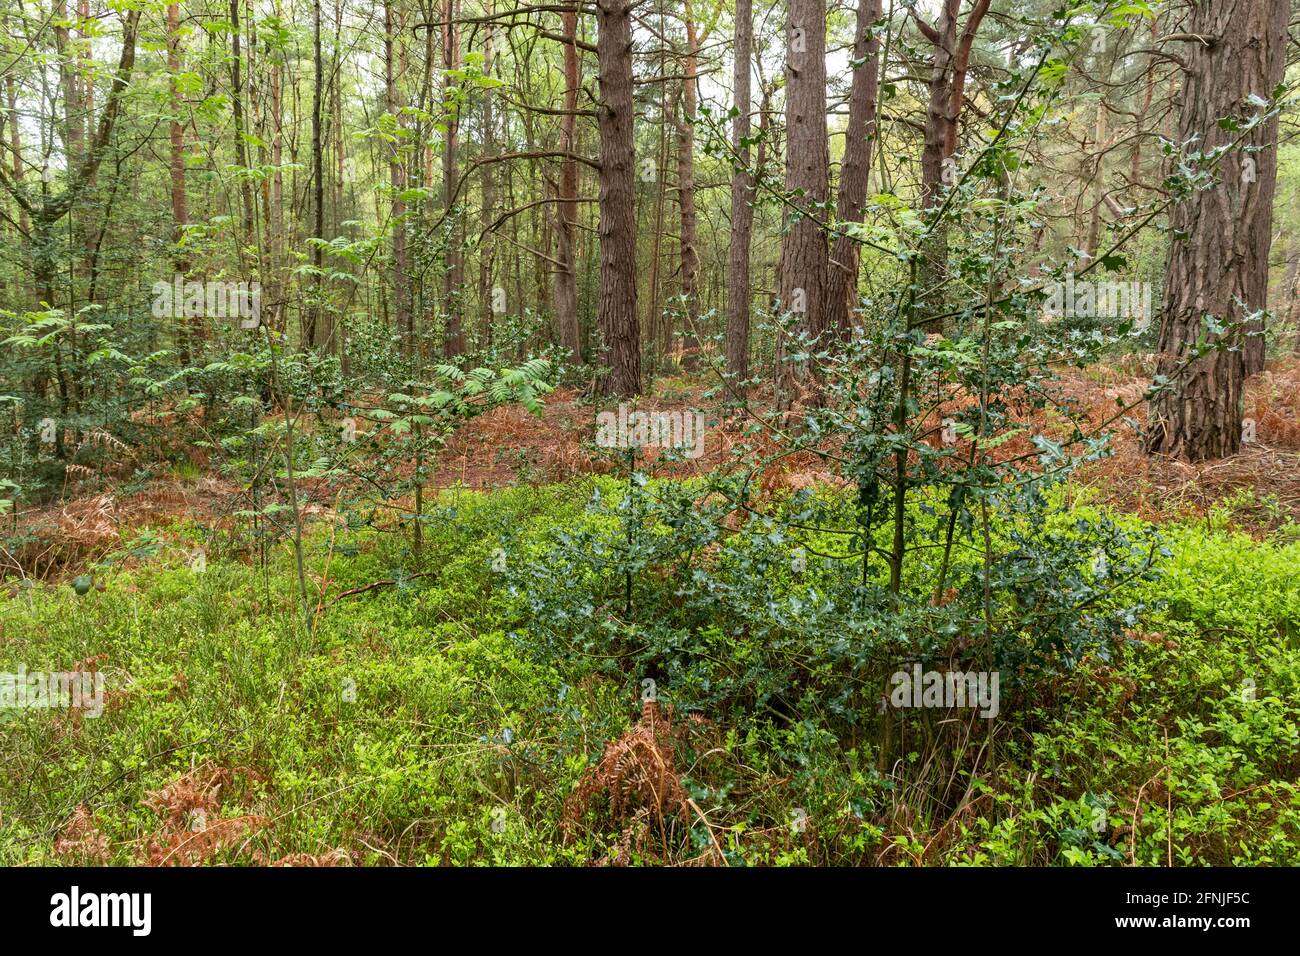 Understorey vegetation in a scots pine (Pinus sylvestris) forest plantation in Surrey, UK, including rowan, holly and bilberry Stock Photo